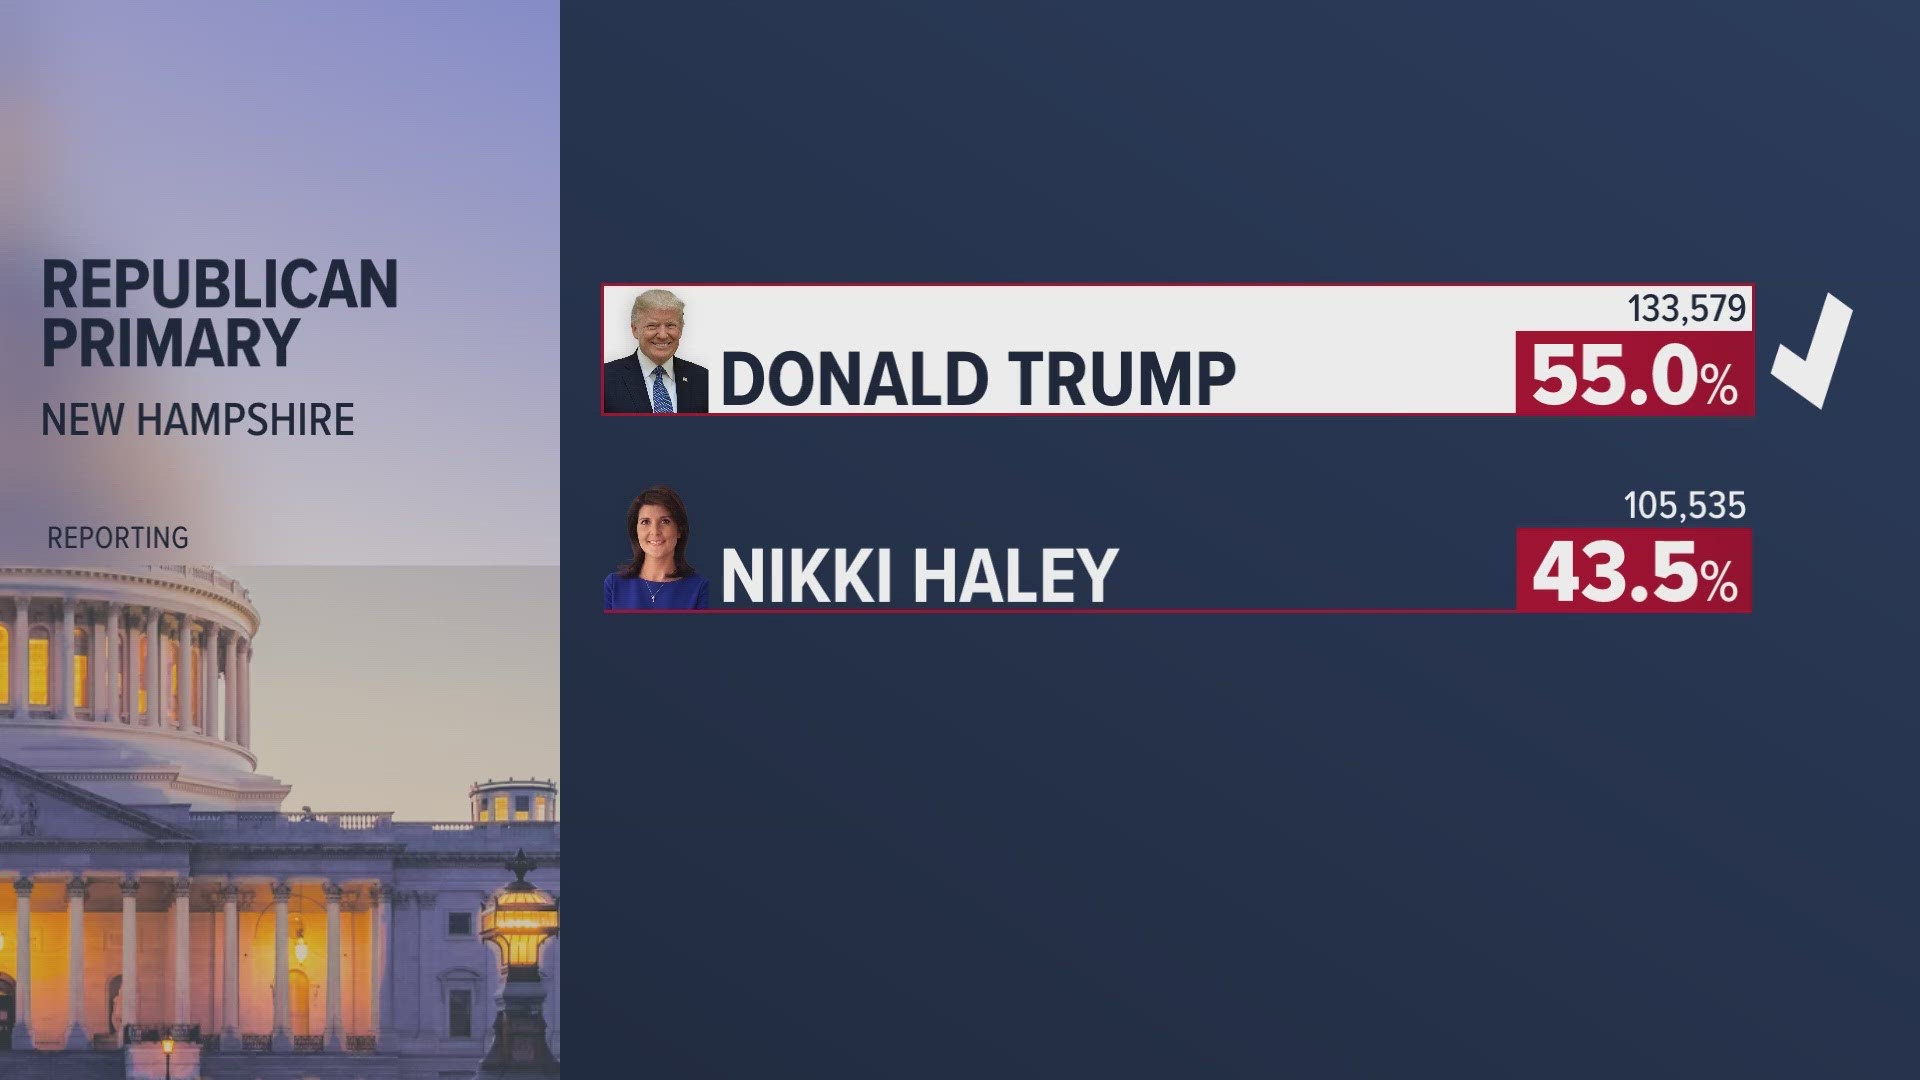 The result was a setback for former U.N. Ambassador Nikki Haley, who invested significant time and financial resources into winning New Hampshire.